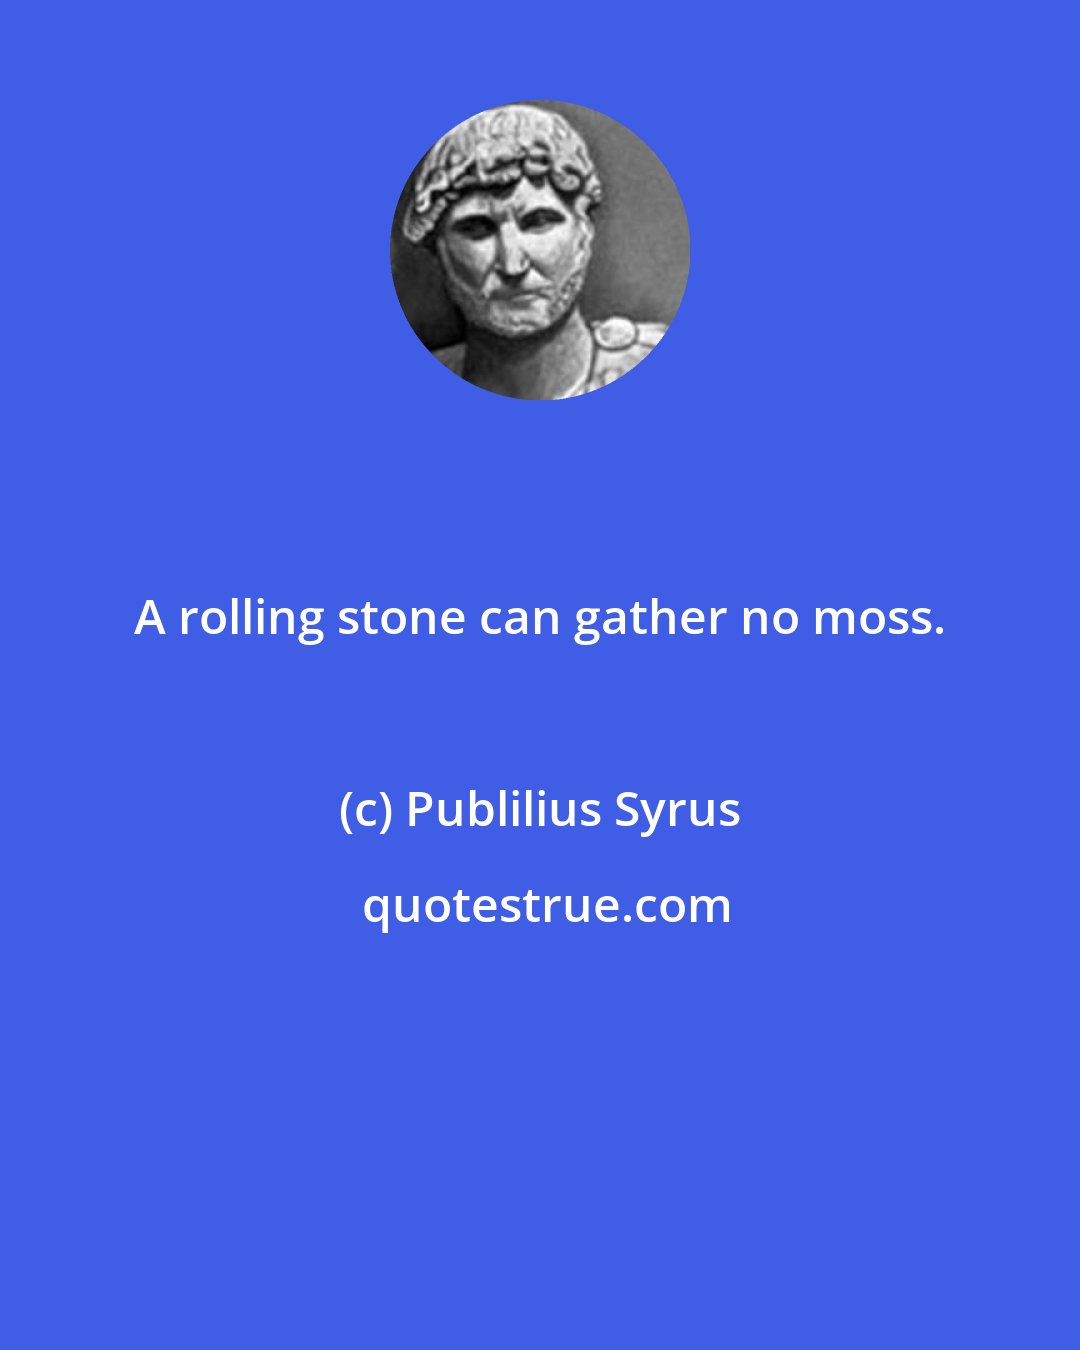 Publilius Syrus: A rolling stone can gather no moss.